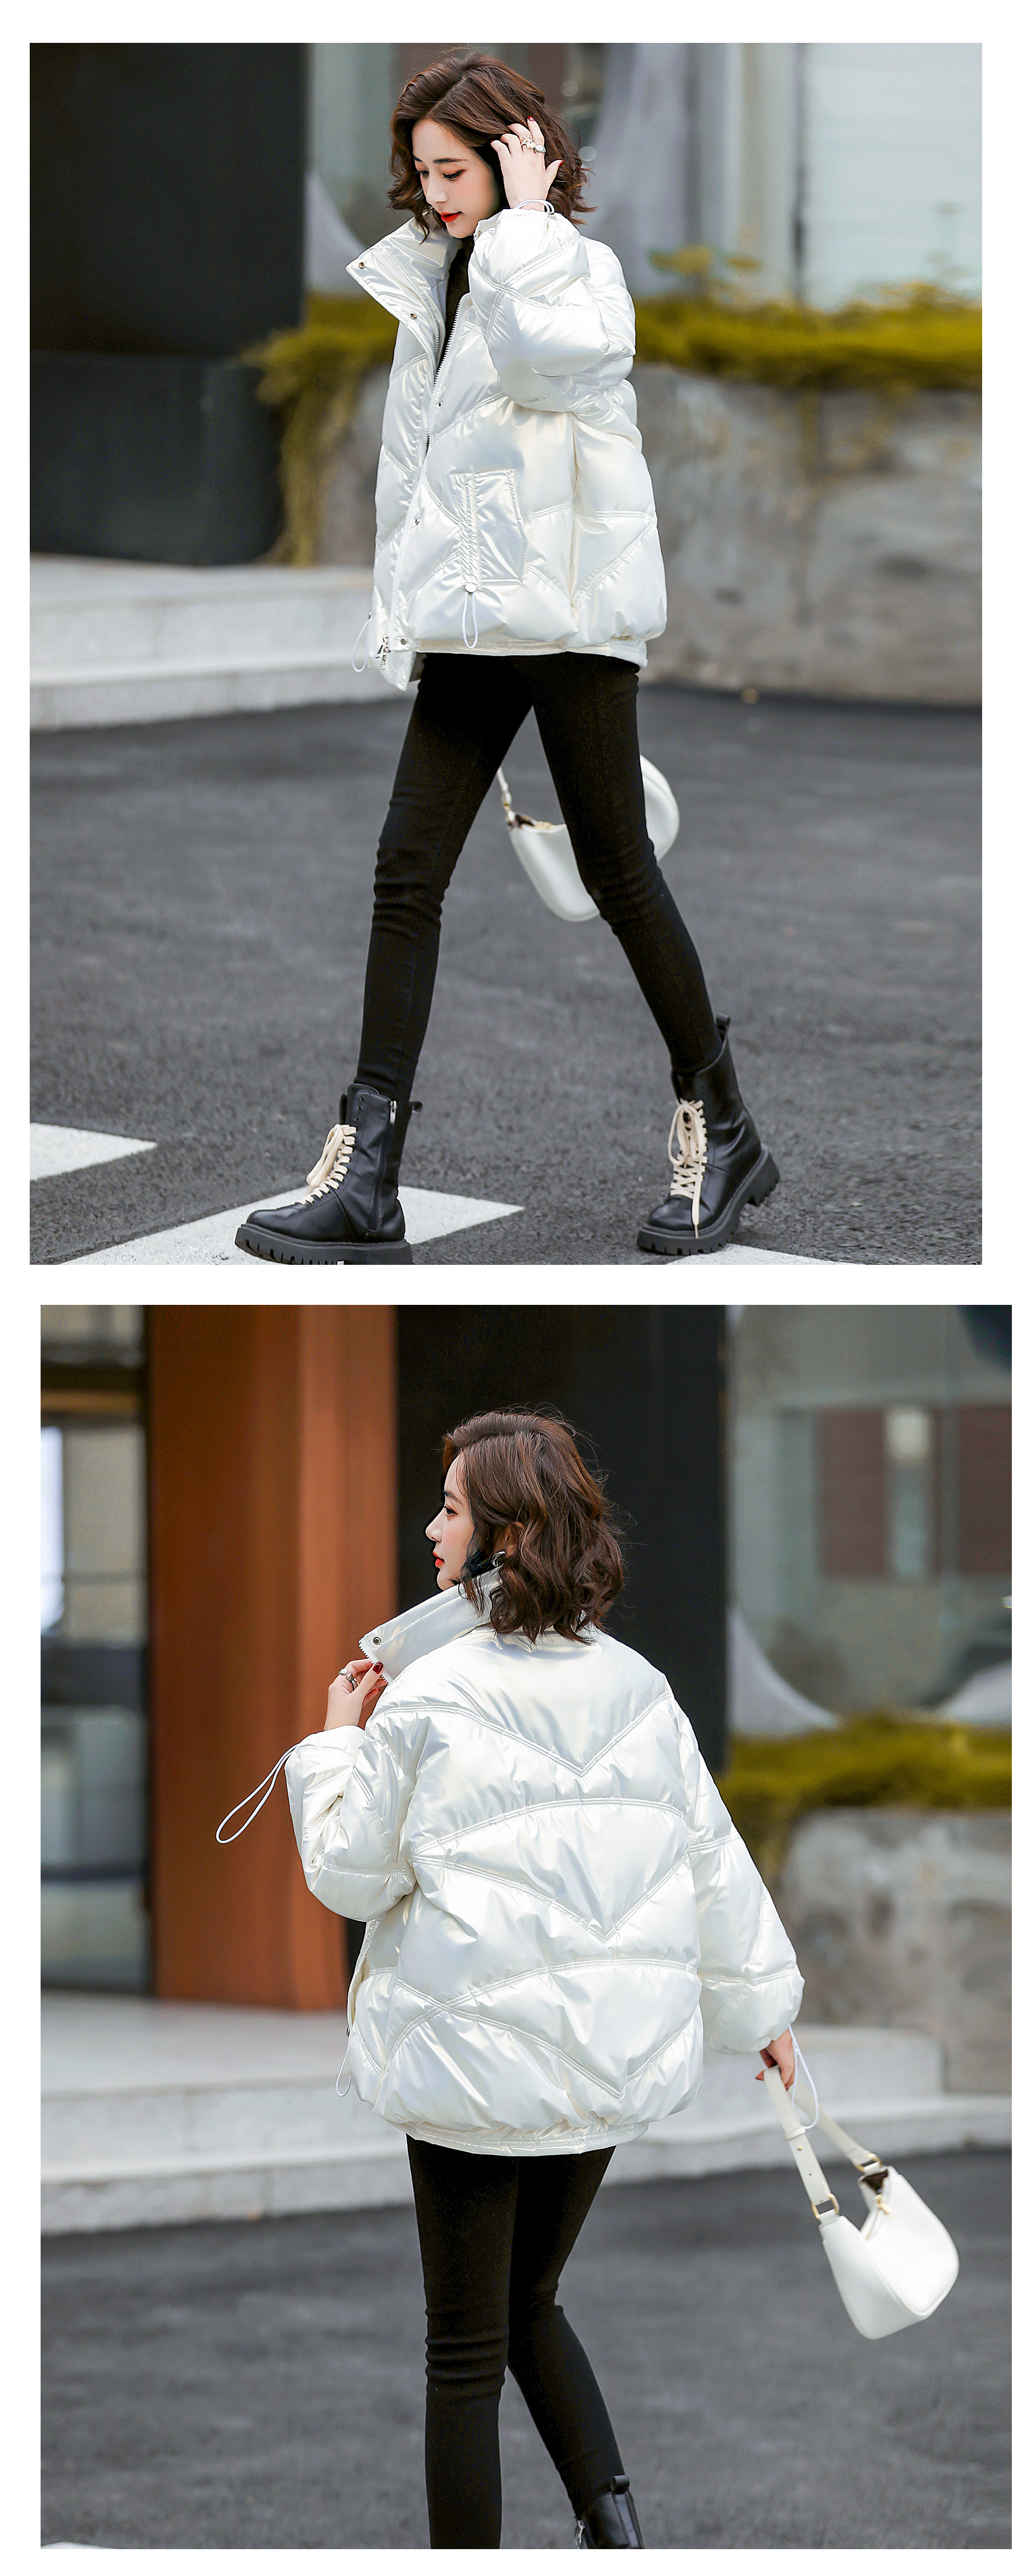 Women's Cropped Puffer Jacket Fashion Winter Outfit Coat17